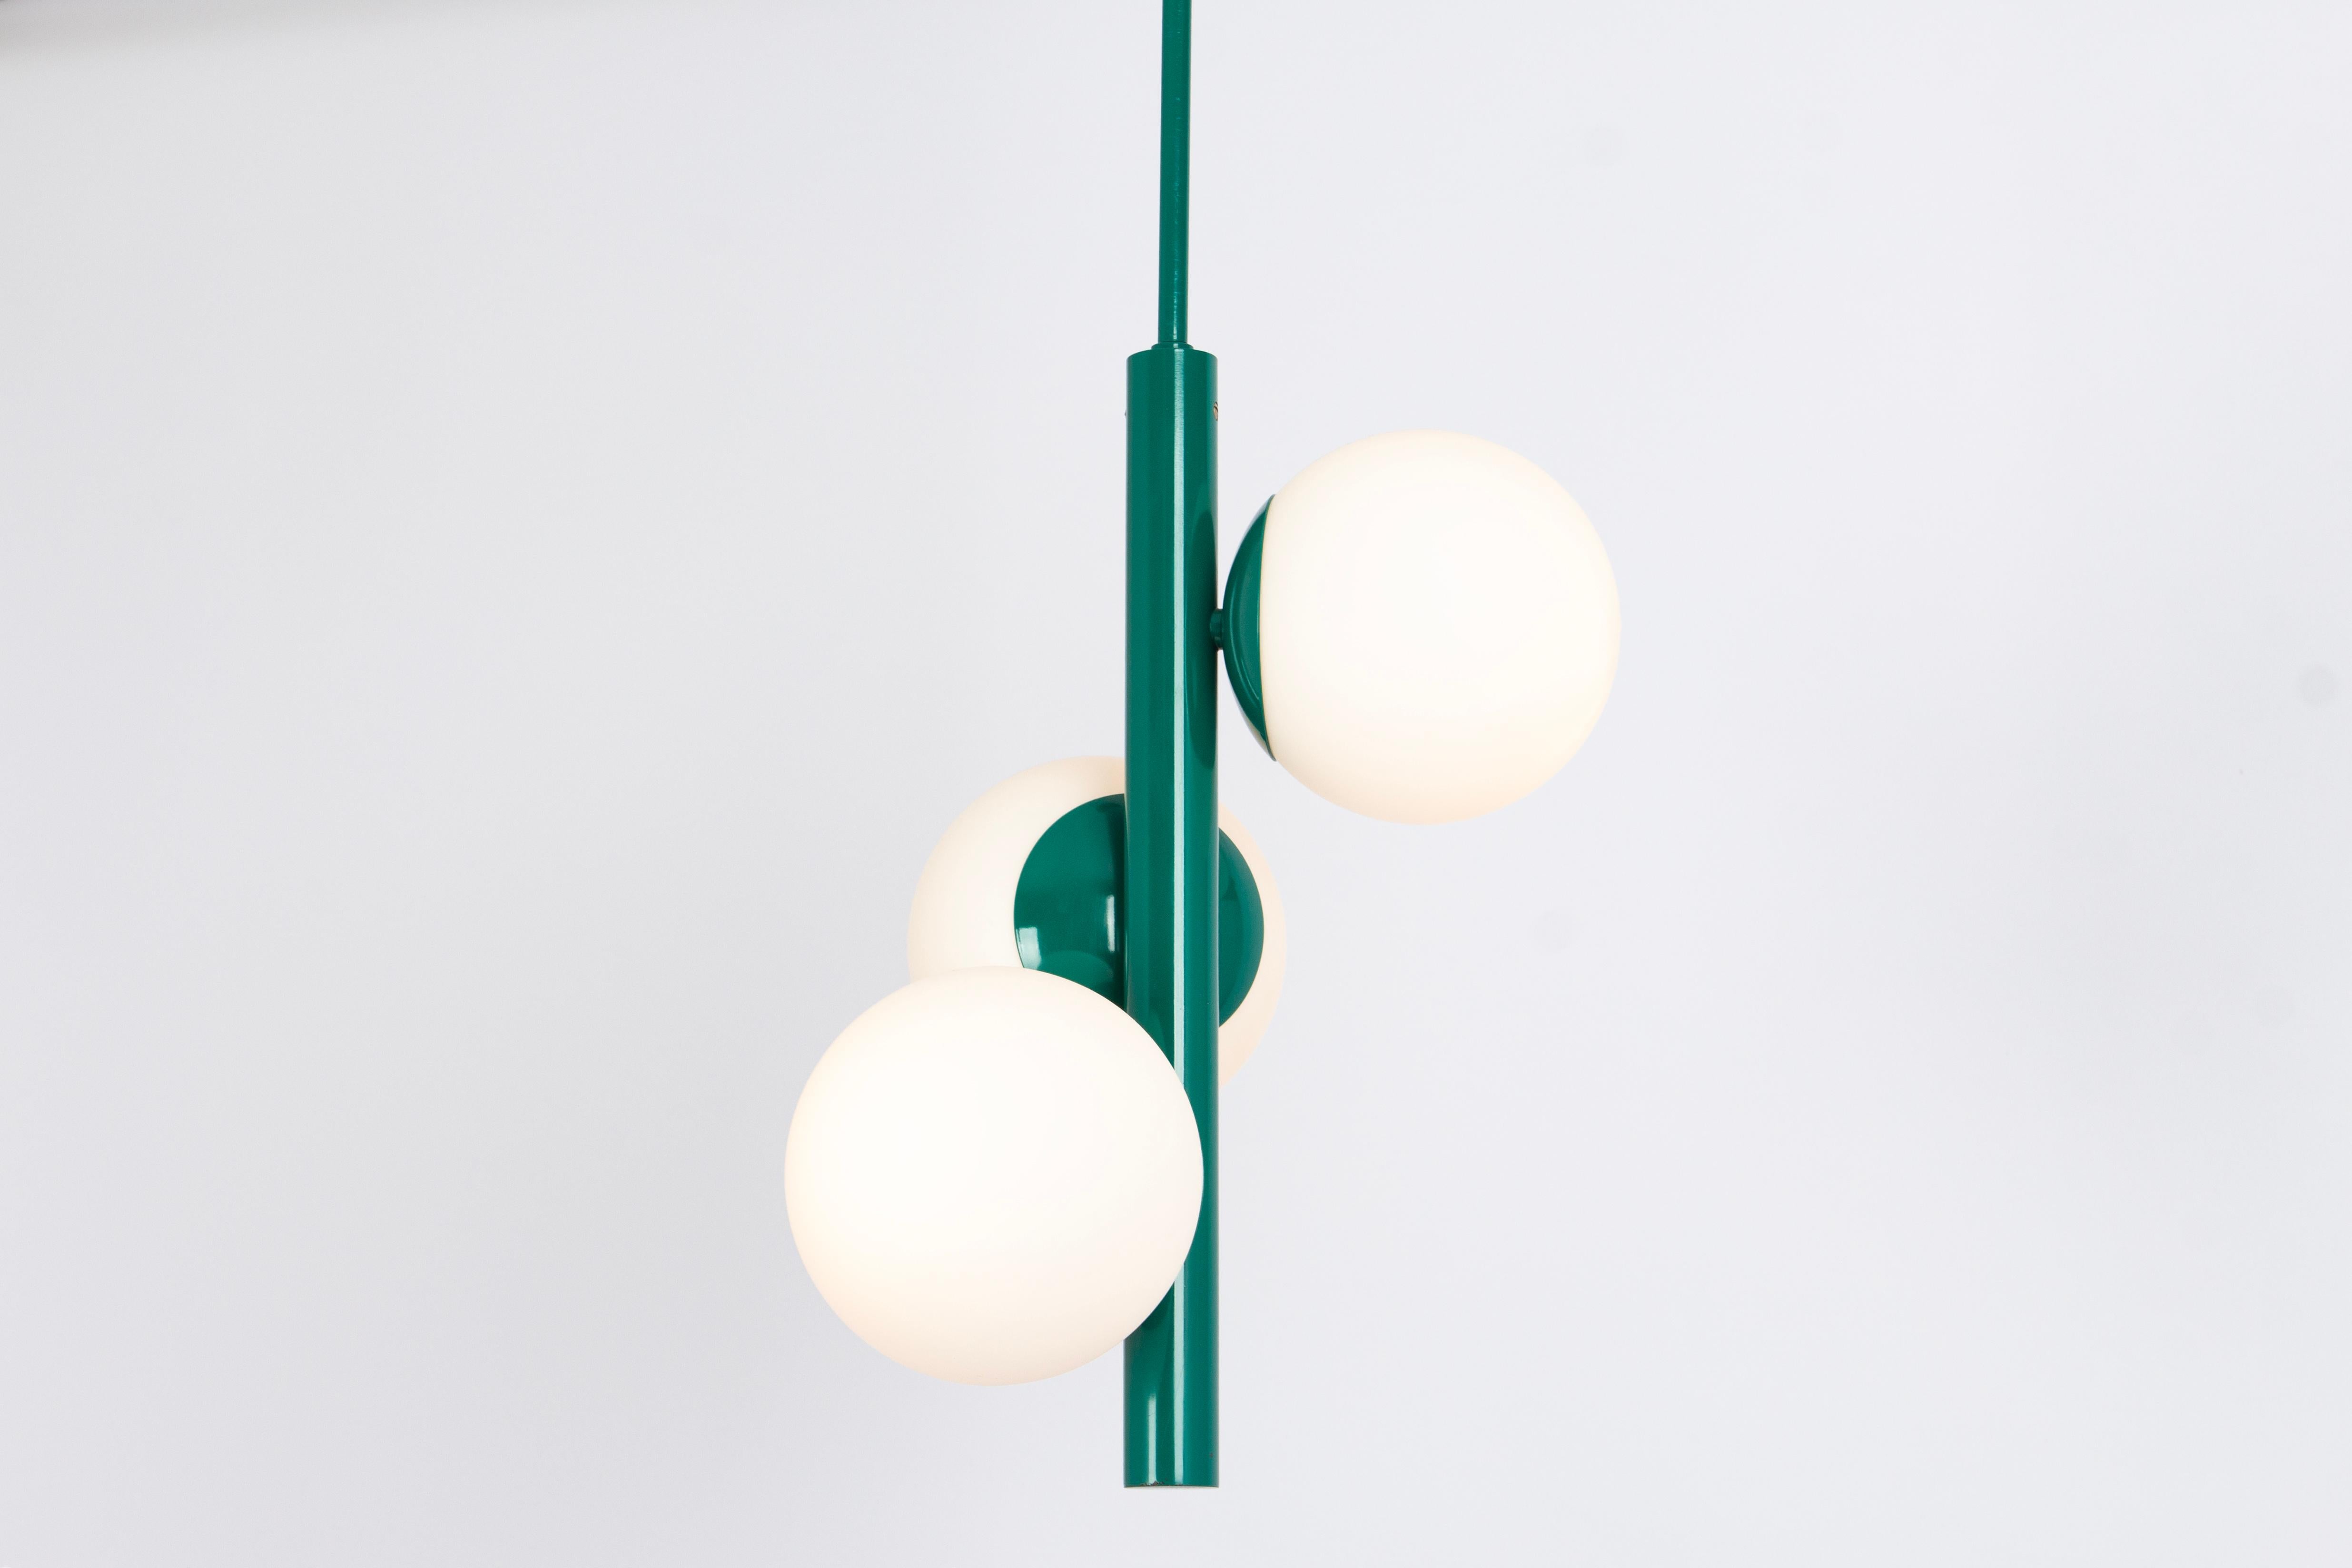 Wonderful Sputnik pendant light made by Kaiser Leuchten, Germany, circa 1970-1979.
Great Atomium-shaped chandelier with 3 opal glass pieces.
This exquisite lighting fixture boasts a captivating green color that adds a touch of sophistication and